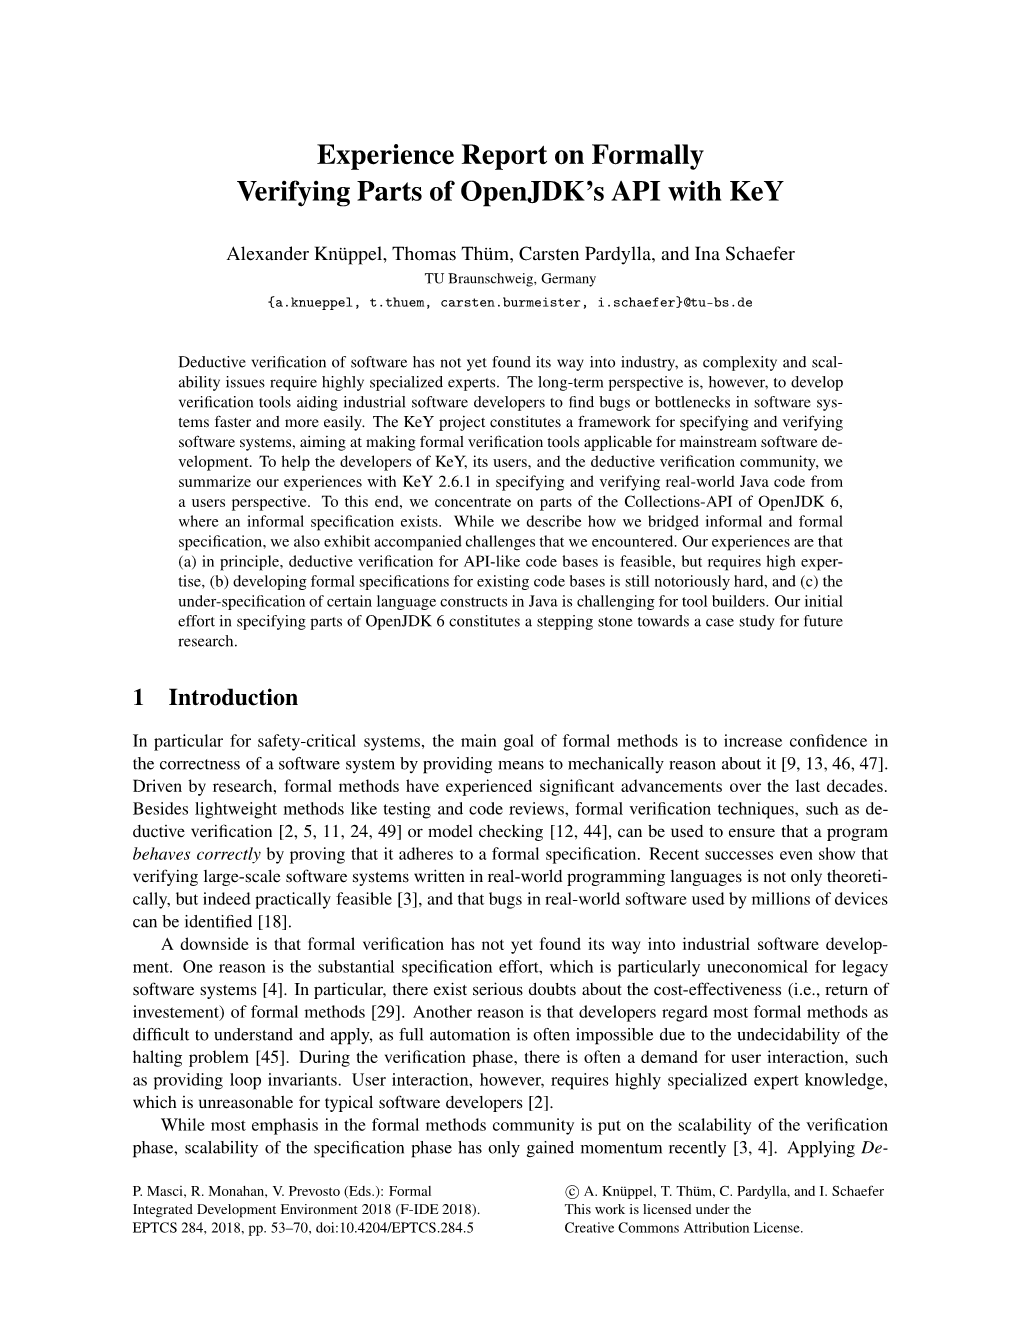 Experience Report on Formally Verifying Parts of Openjdk's API